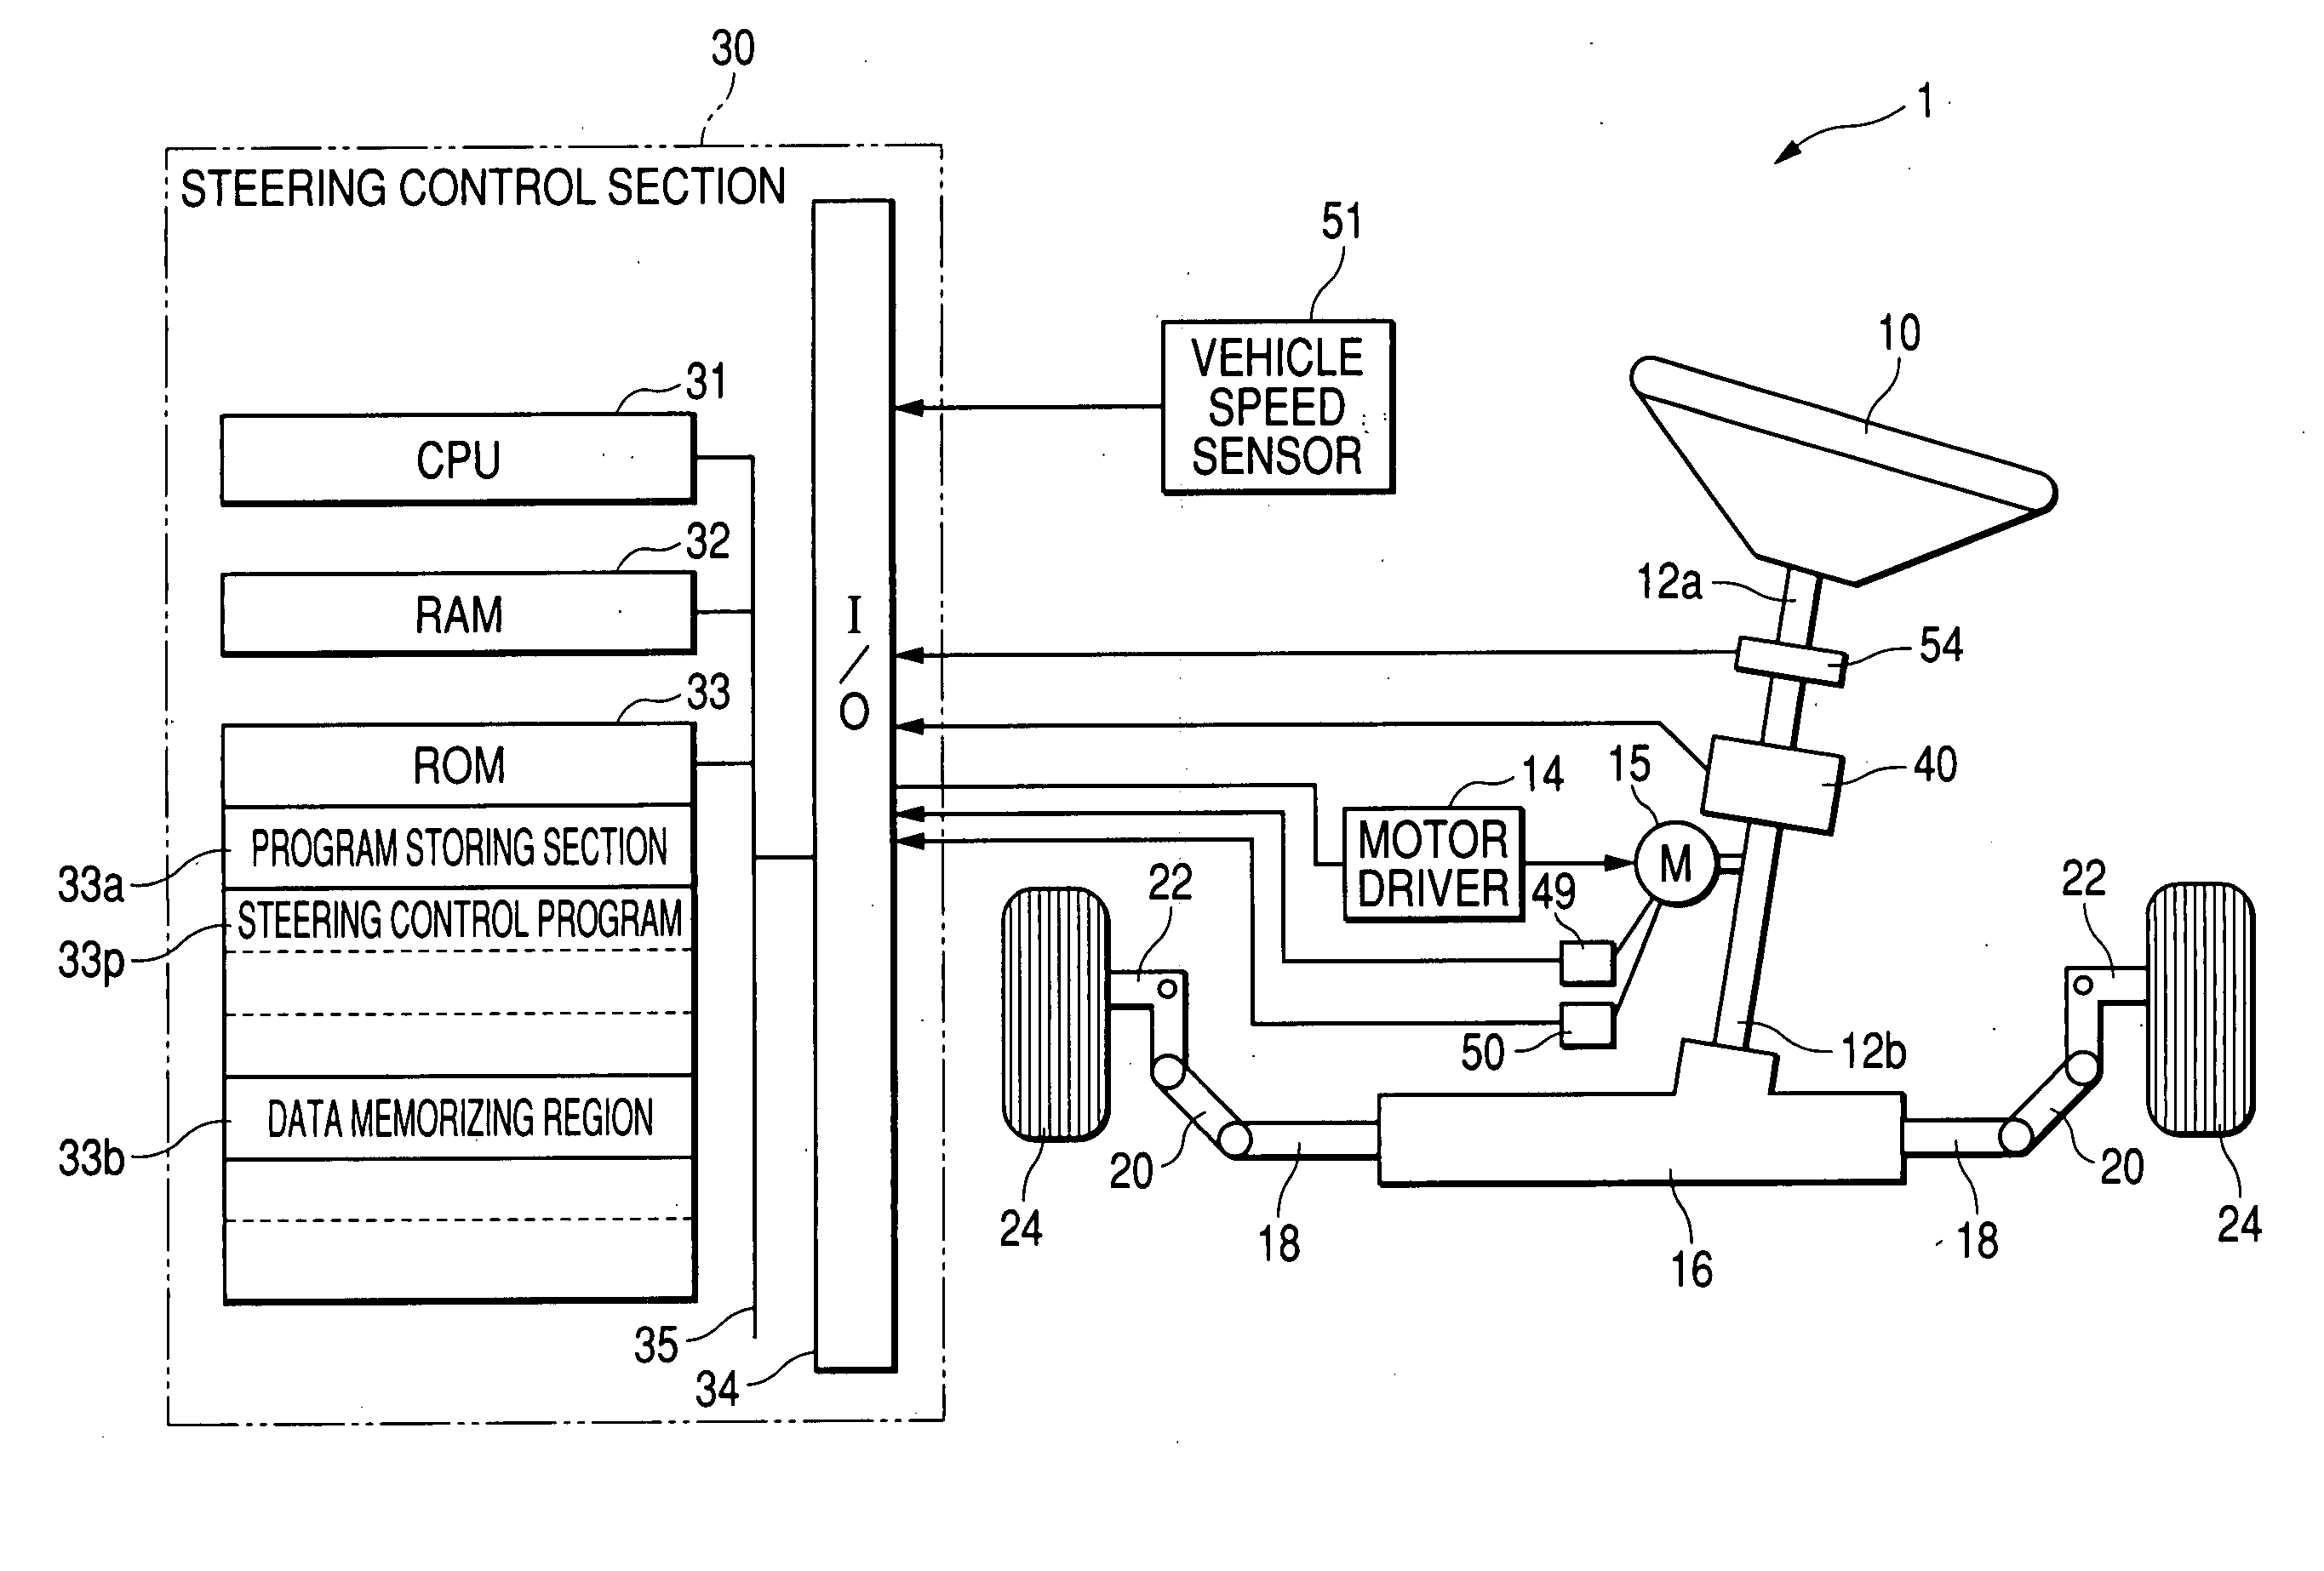 Control apparatus for an electrically driven power steering